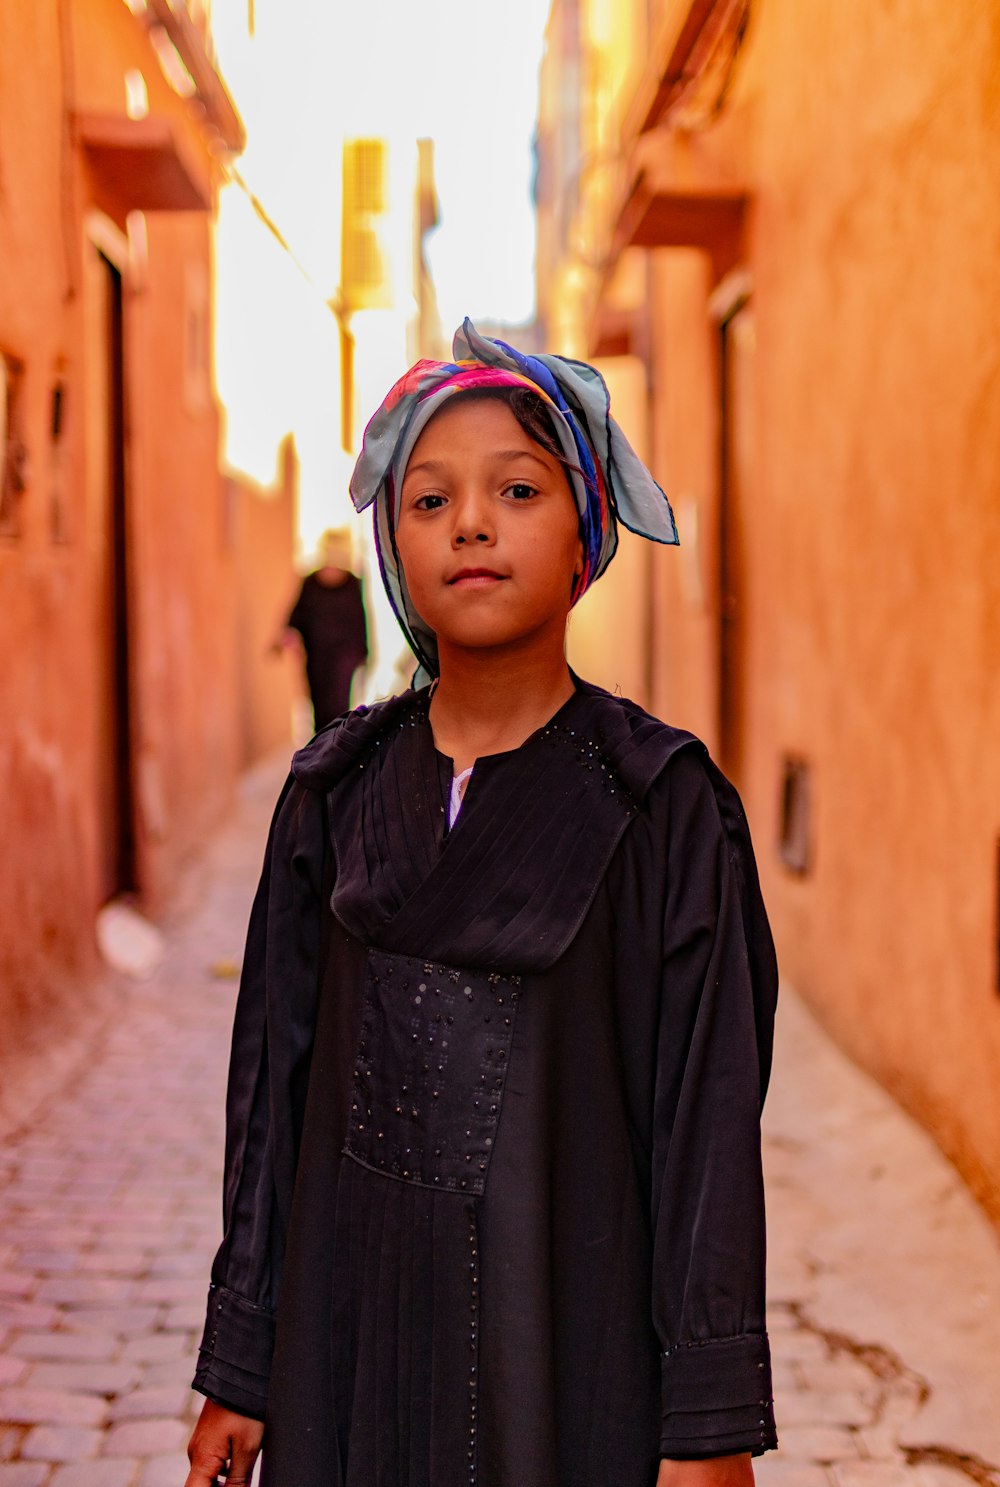 a young girl in a black dress and a turban on her head